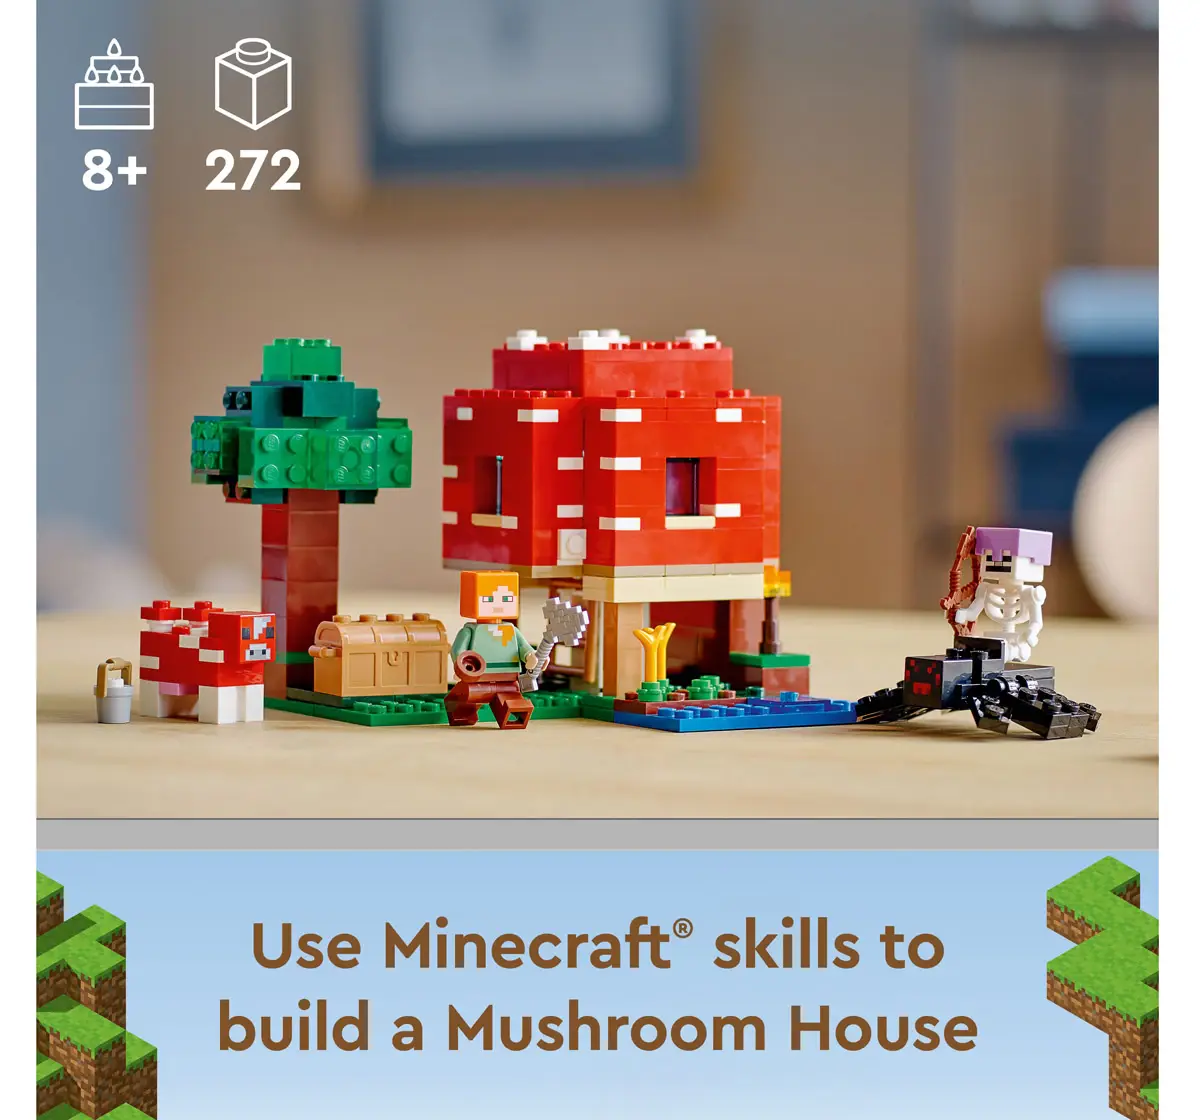 Lego Minecraft The Mushroom House 21179 Building Kit Multicolour For Kids Ages 8Y+ (272 Pieces)